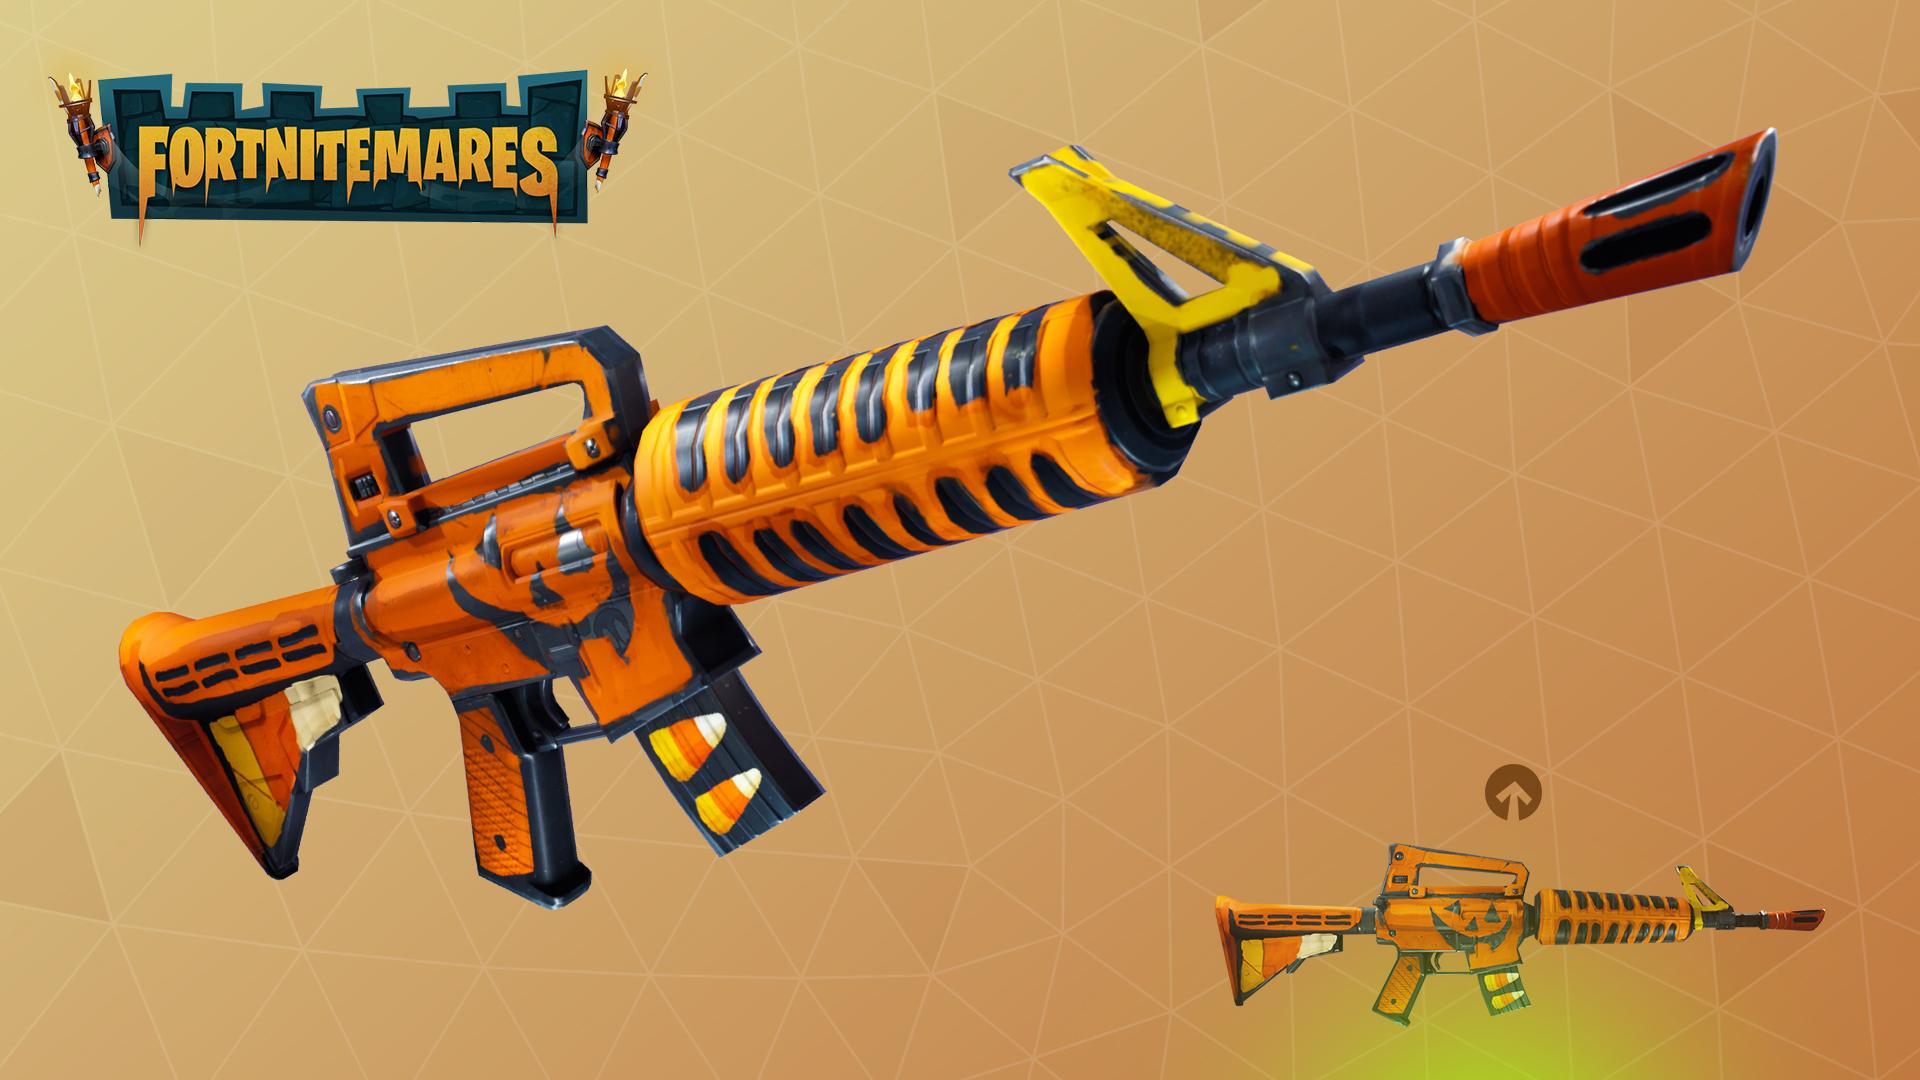 They should add weapon skins to fortnite Battle Royale